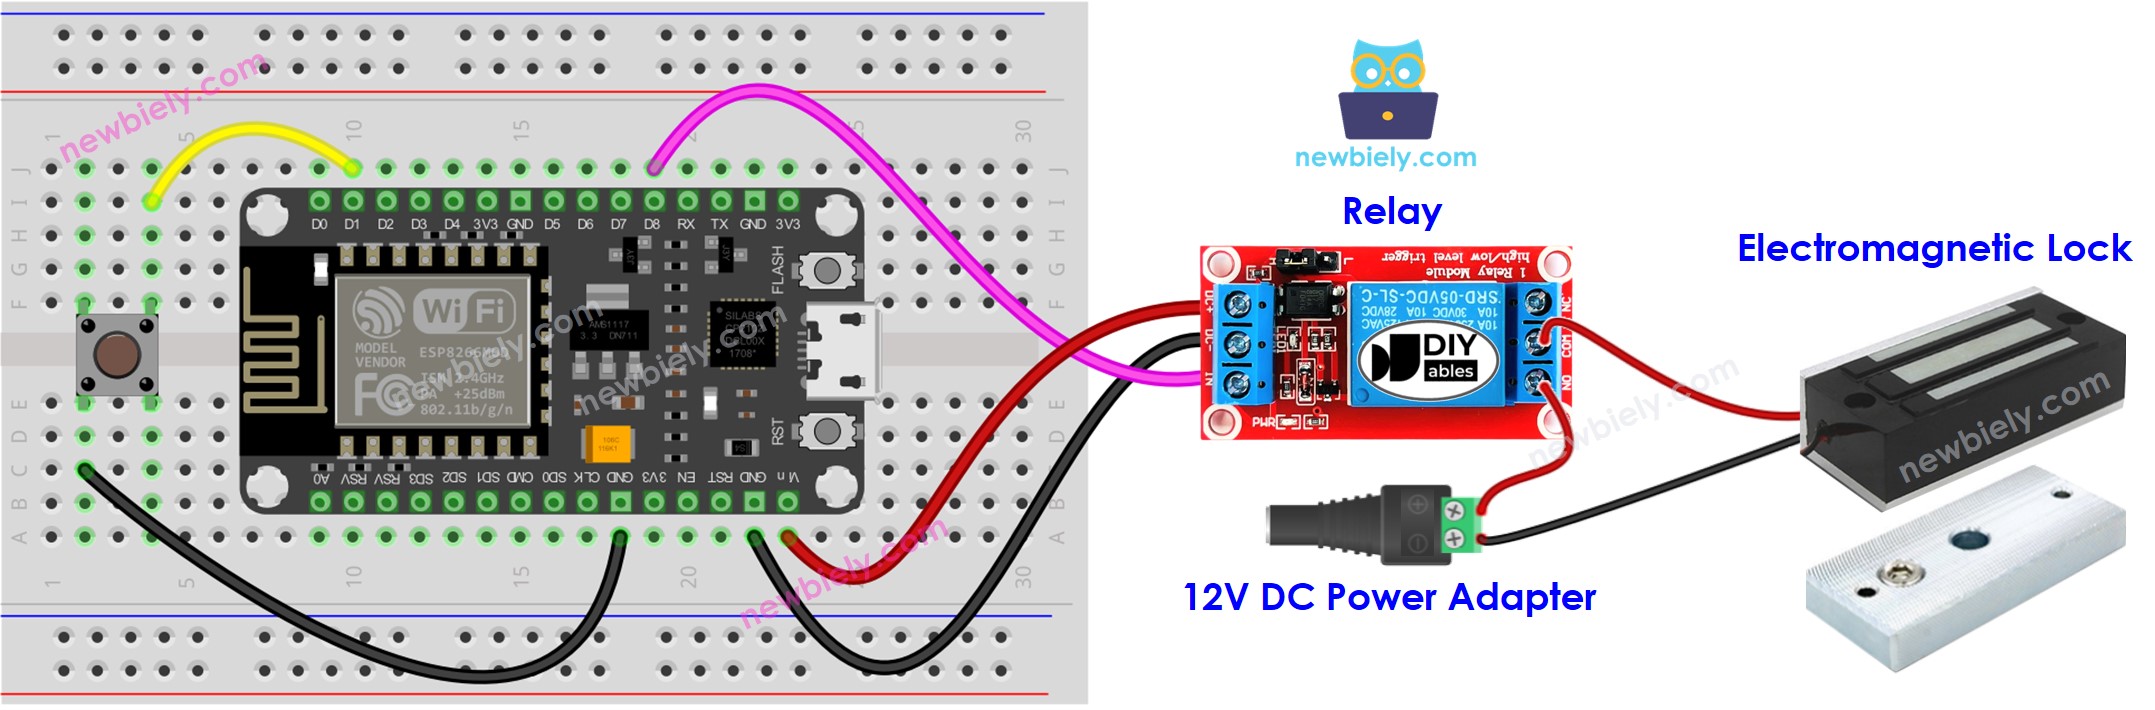 The wiring diagram between ESP8266 NodeMCU and Button Electromagnetic Lock